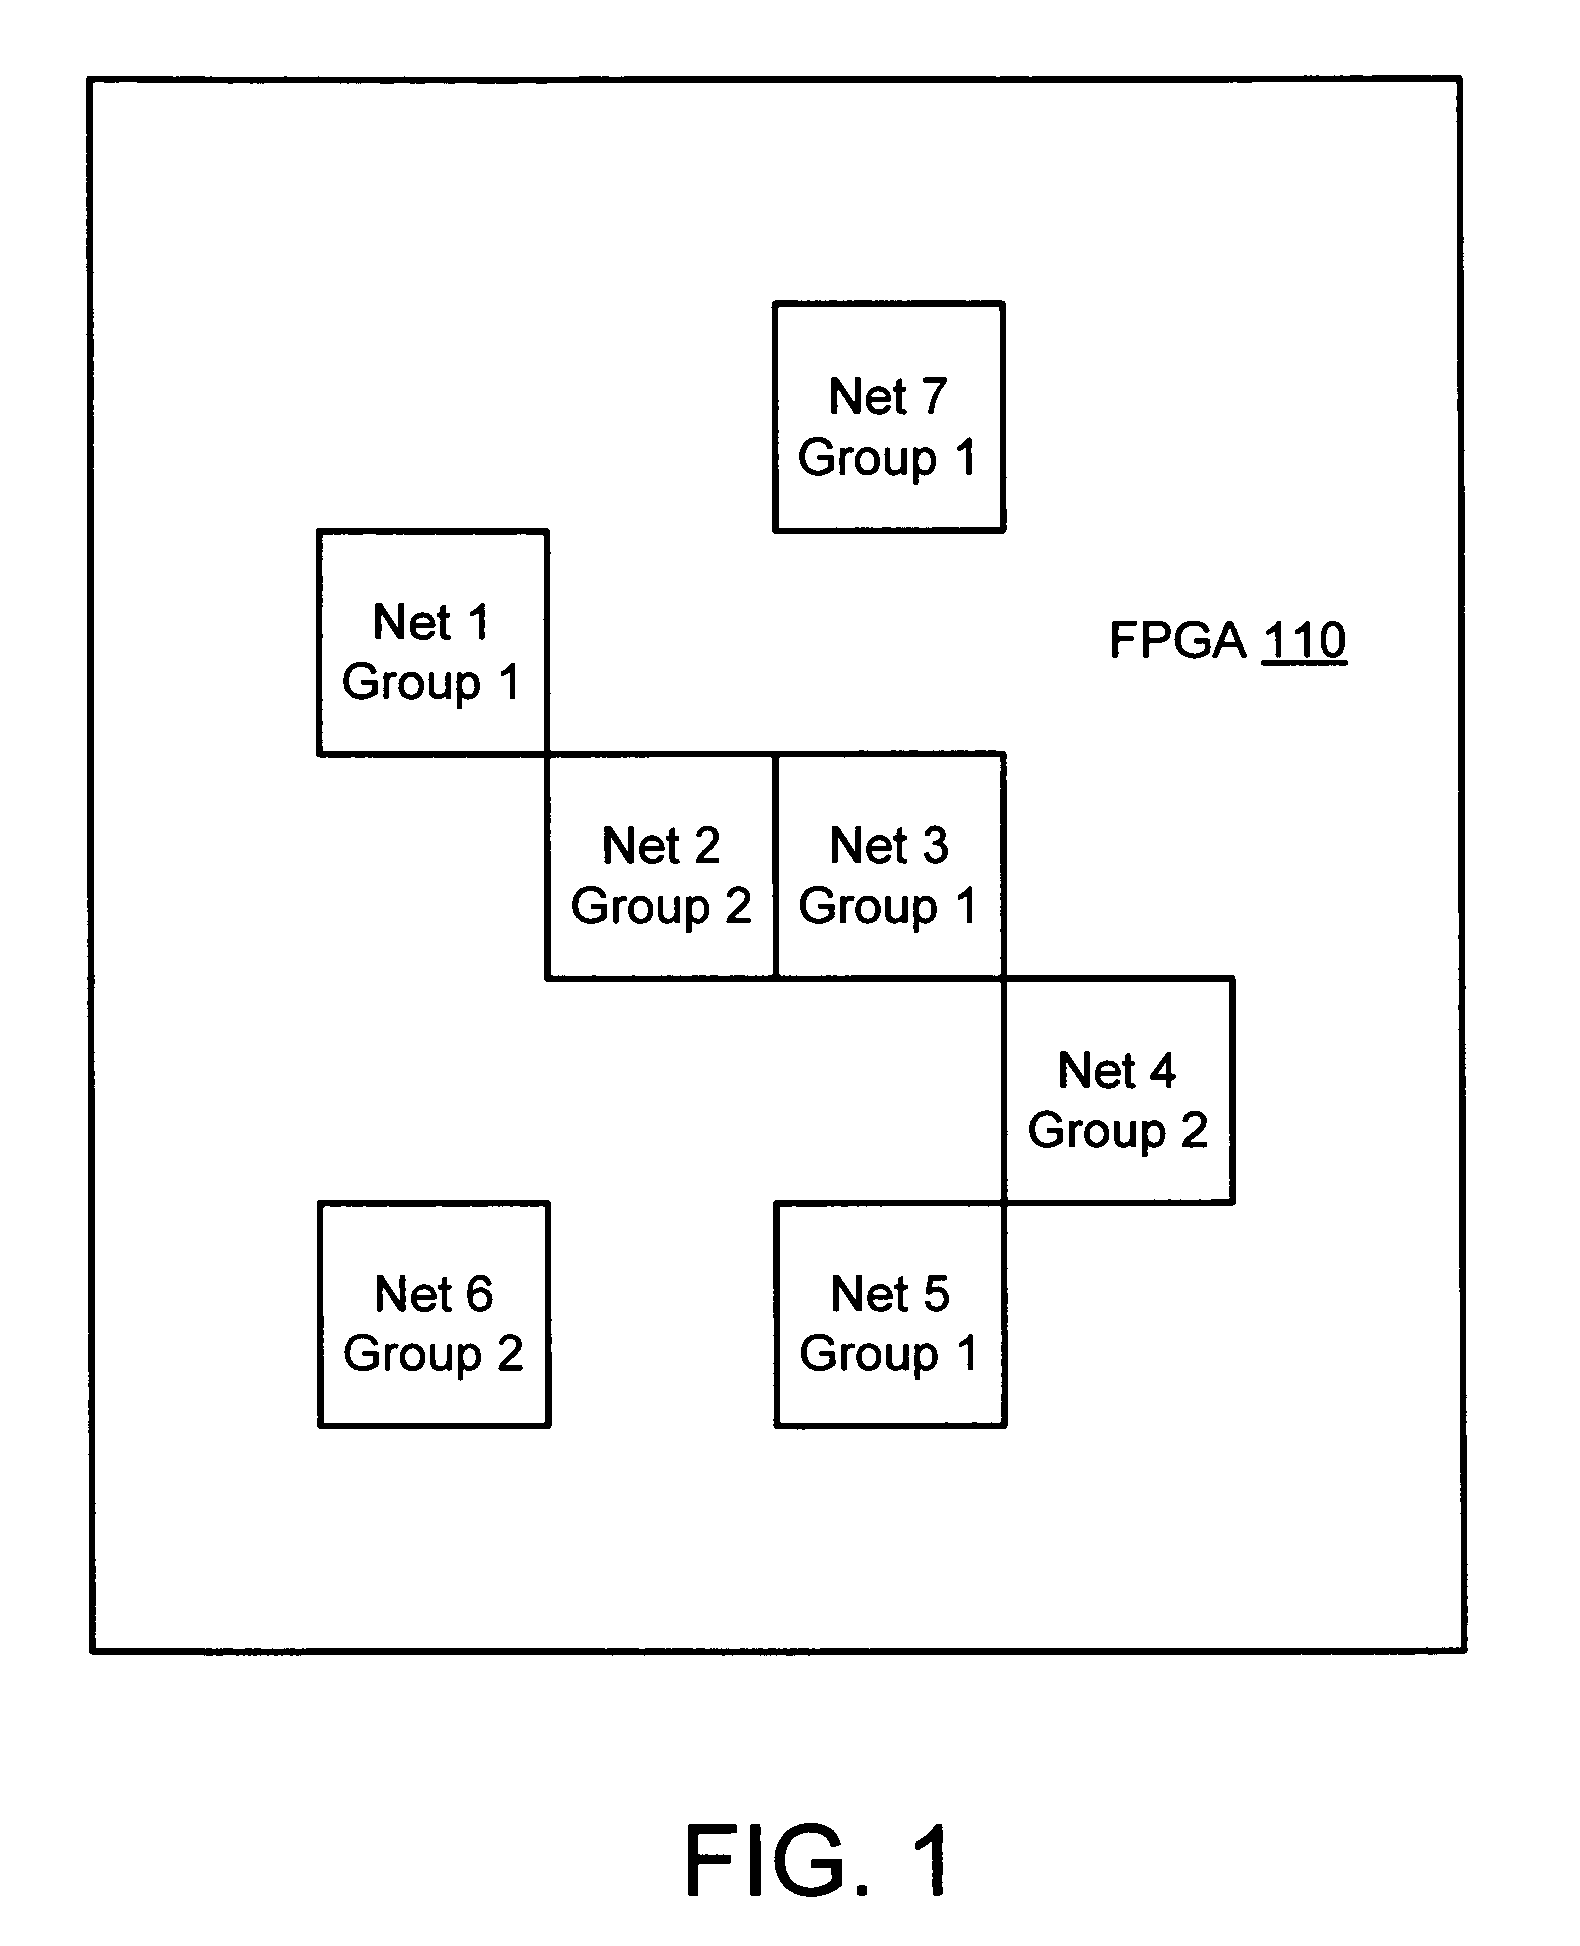 Testing for bridge faults in the interconnect of programmable integrated circuits